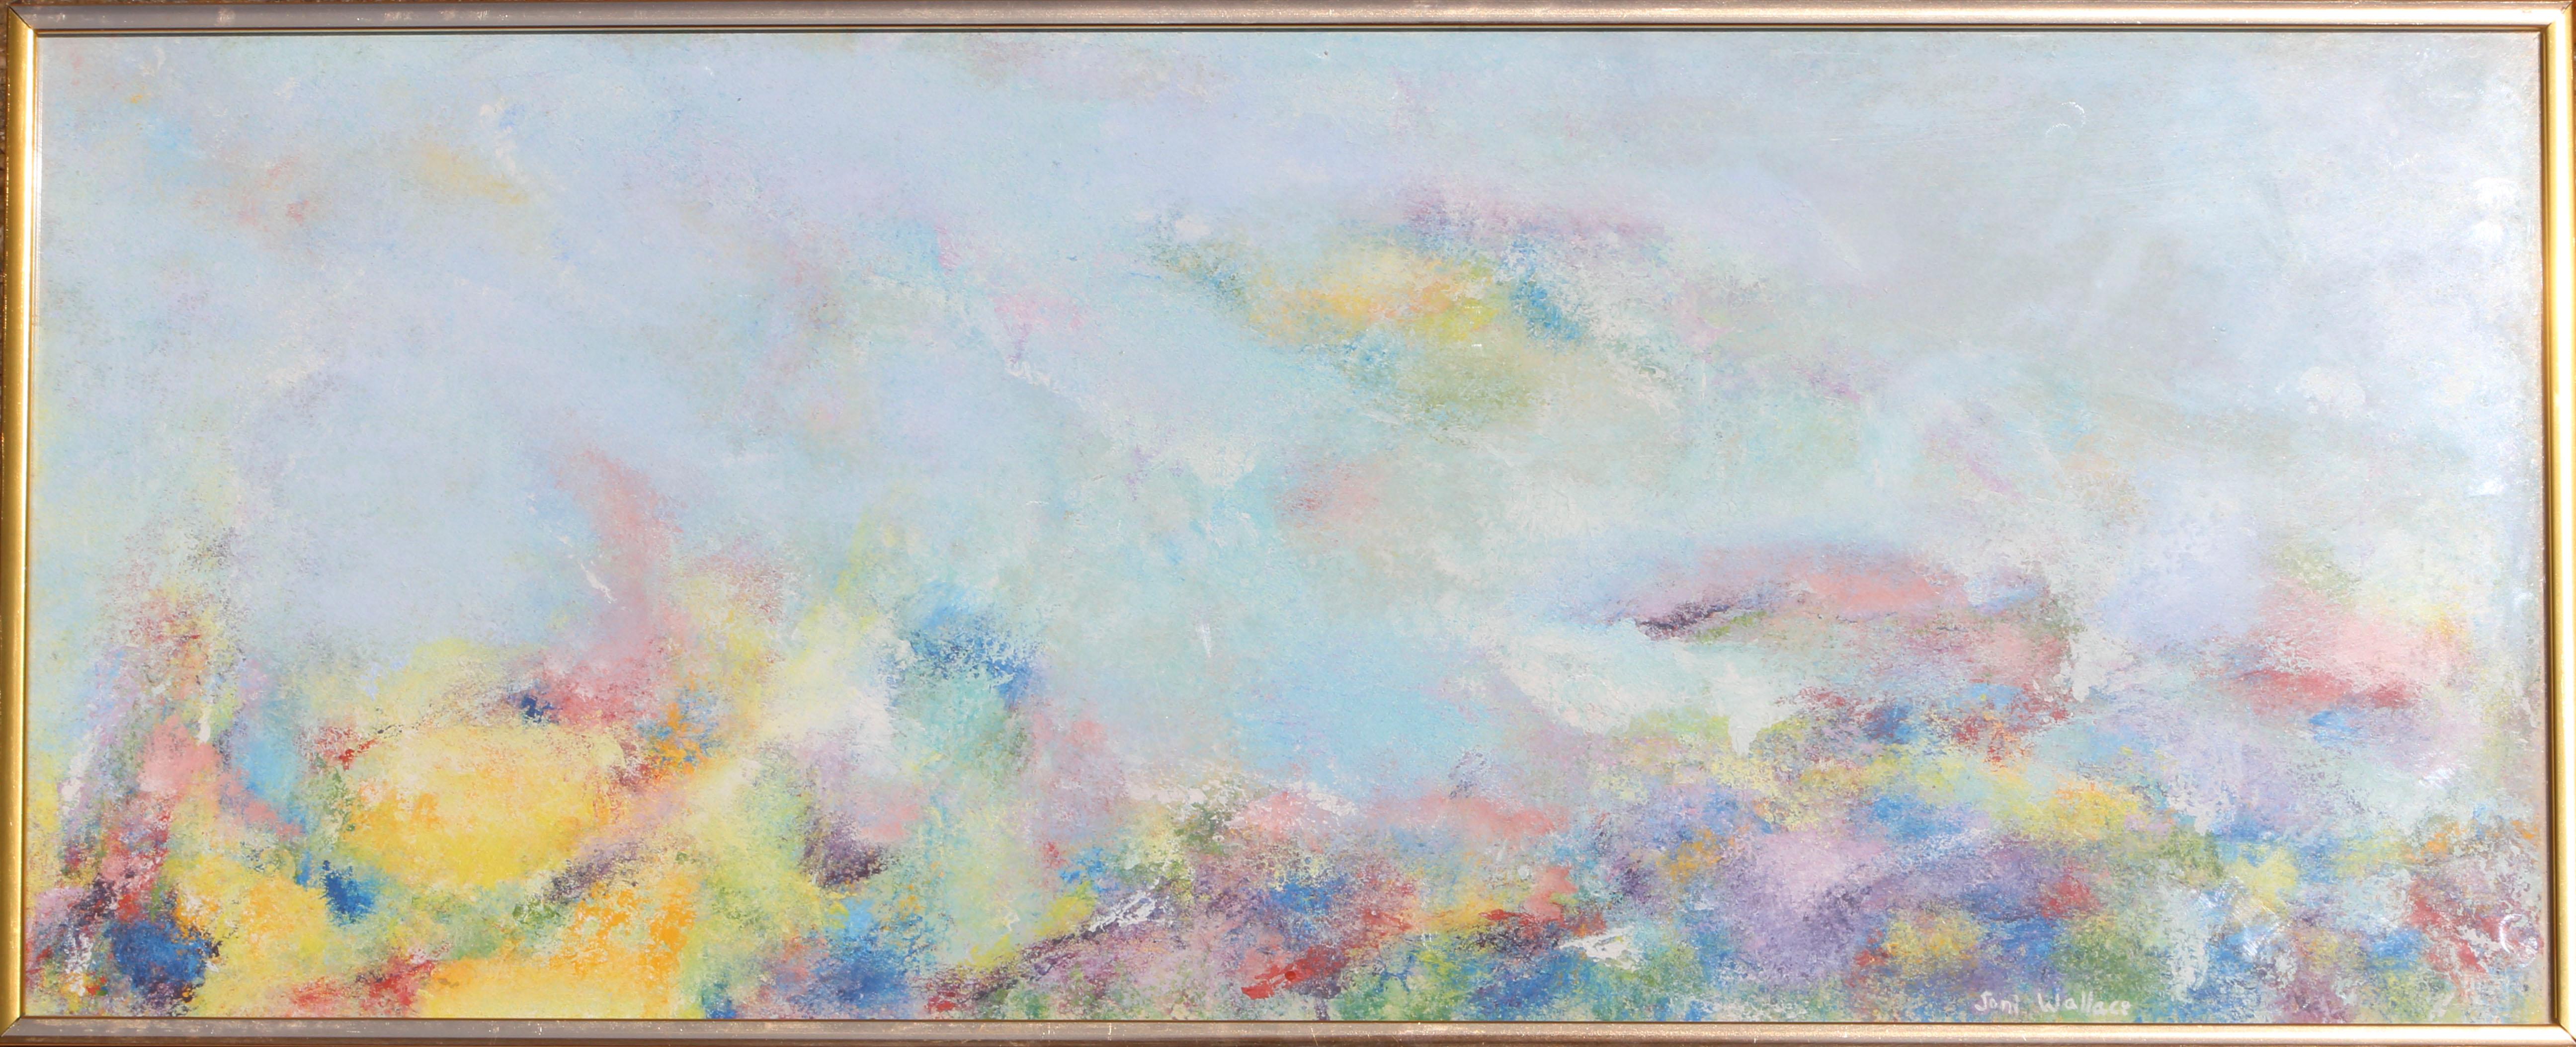 A hazy rendition of a flower garden by Soni Wallace, with the colors blending and folding in on one another. Framed behind glass, this pastel-toned painting represents a more fleeting and delicate side of Wallace's normally stark abstract